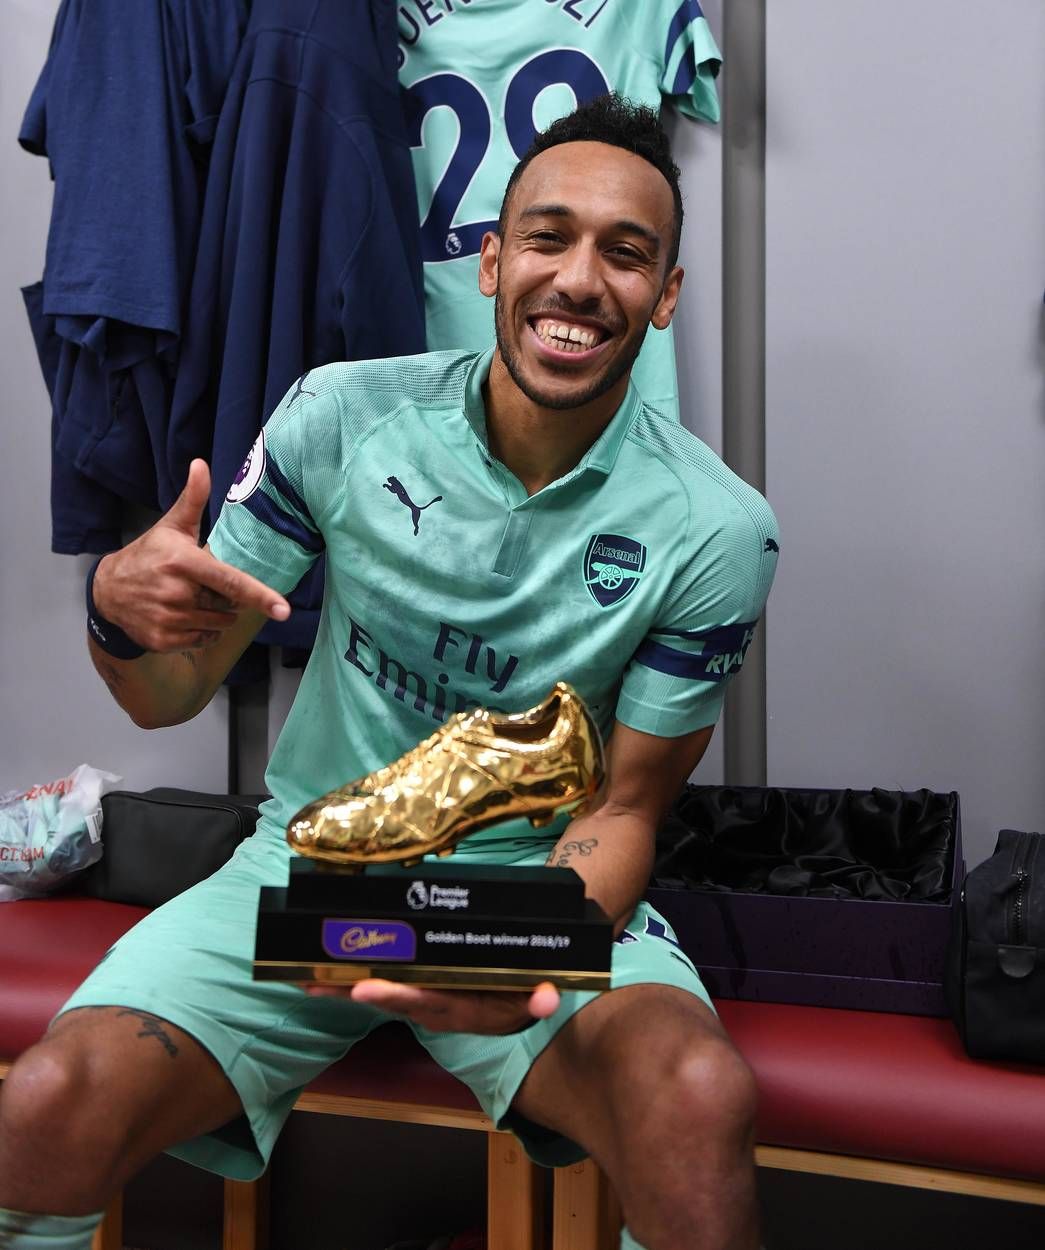 Picture: Auba poses with Golden Boot